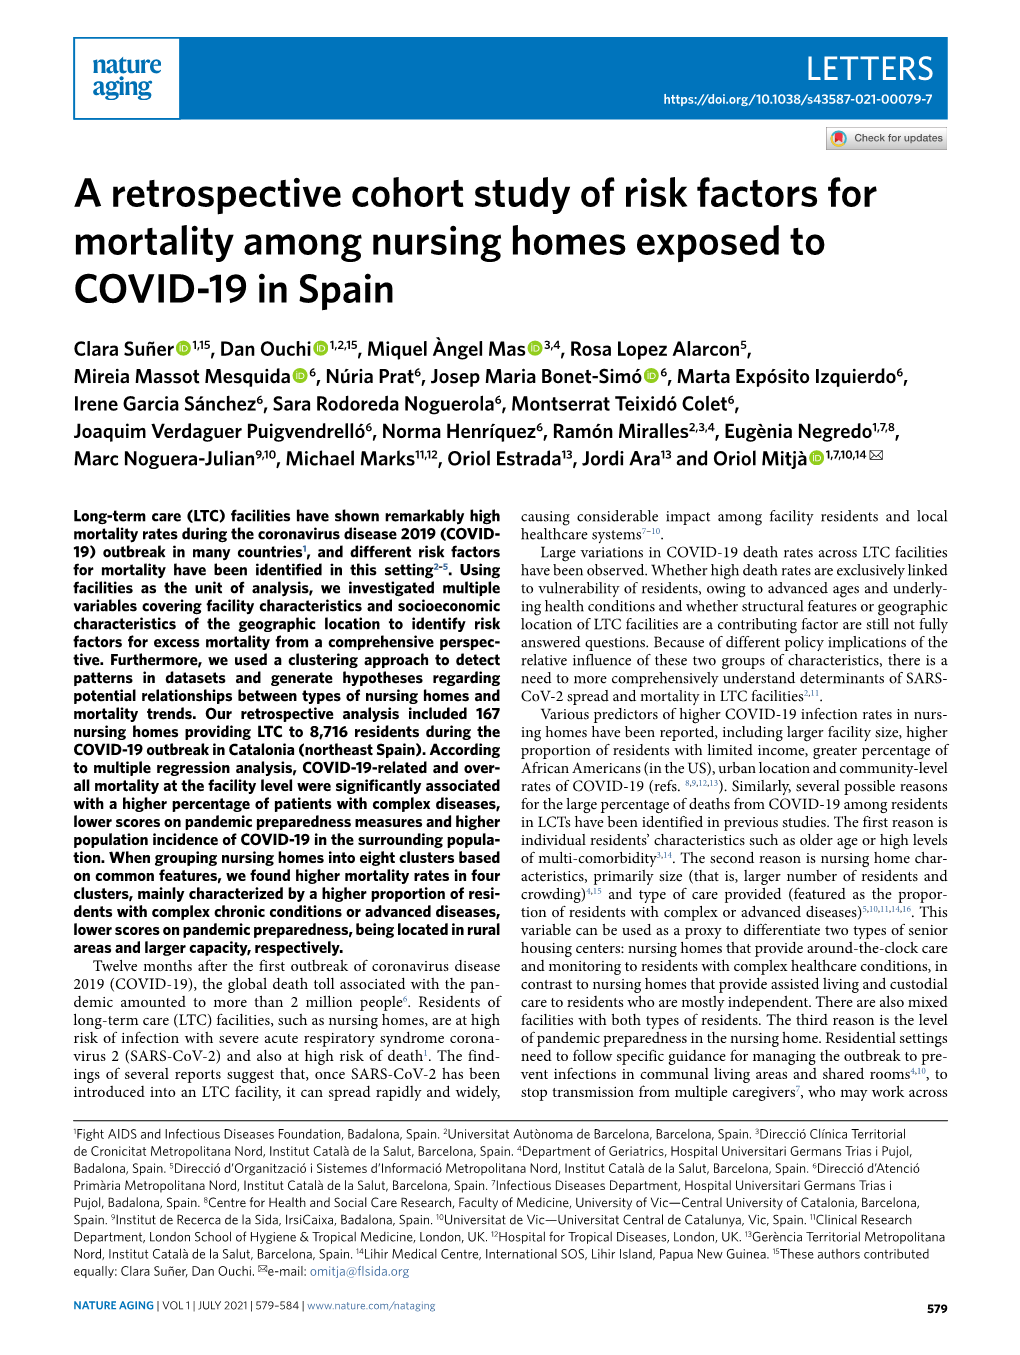 A Retrospective Cohort Study of Risk Factors for Mortality Among Nursing Homes Exposed to COVID-19 in Spain